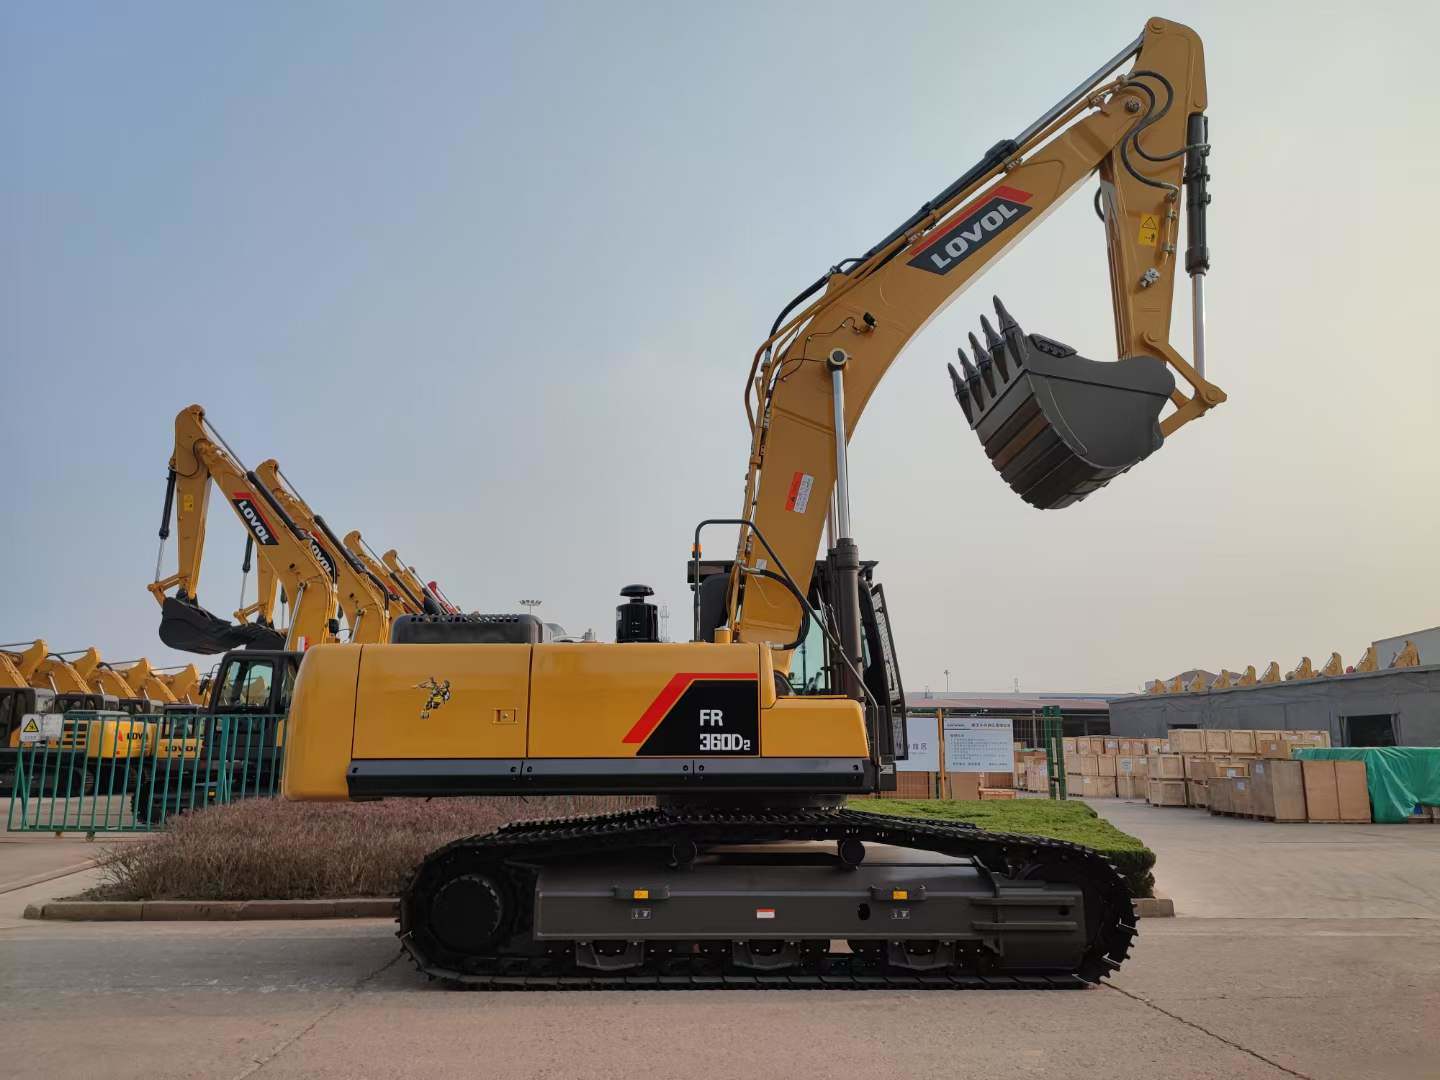 Fr480e Lovol Large Excavator for Mining Excavator 47 Ton for Fale